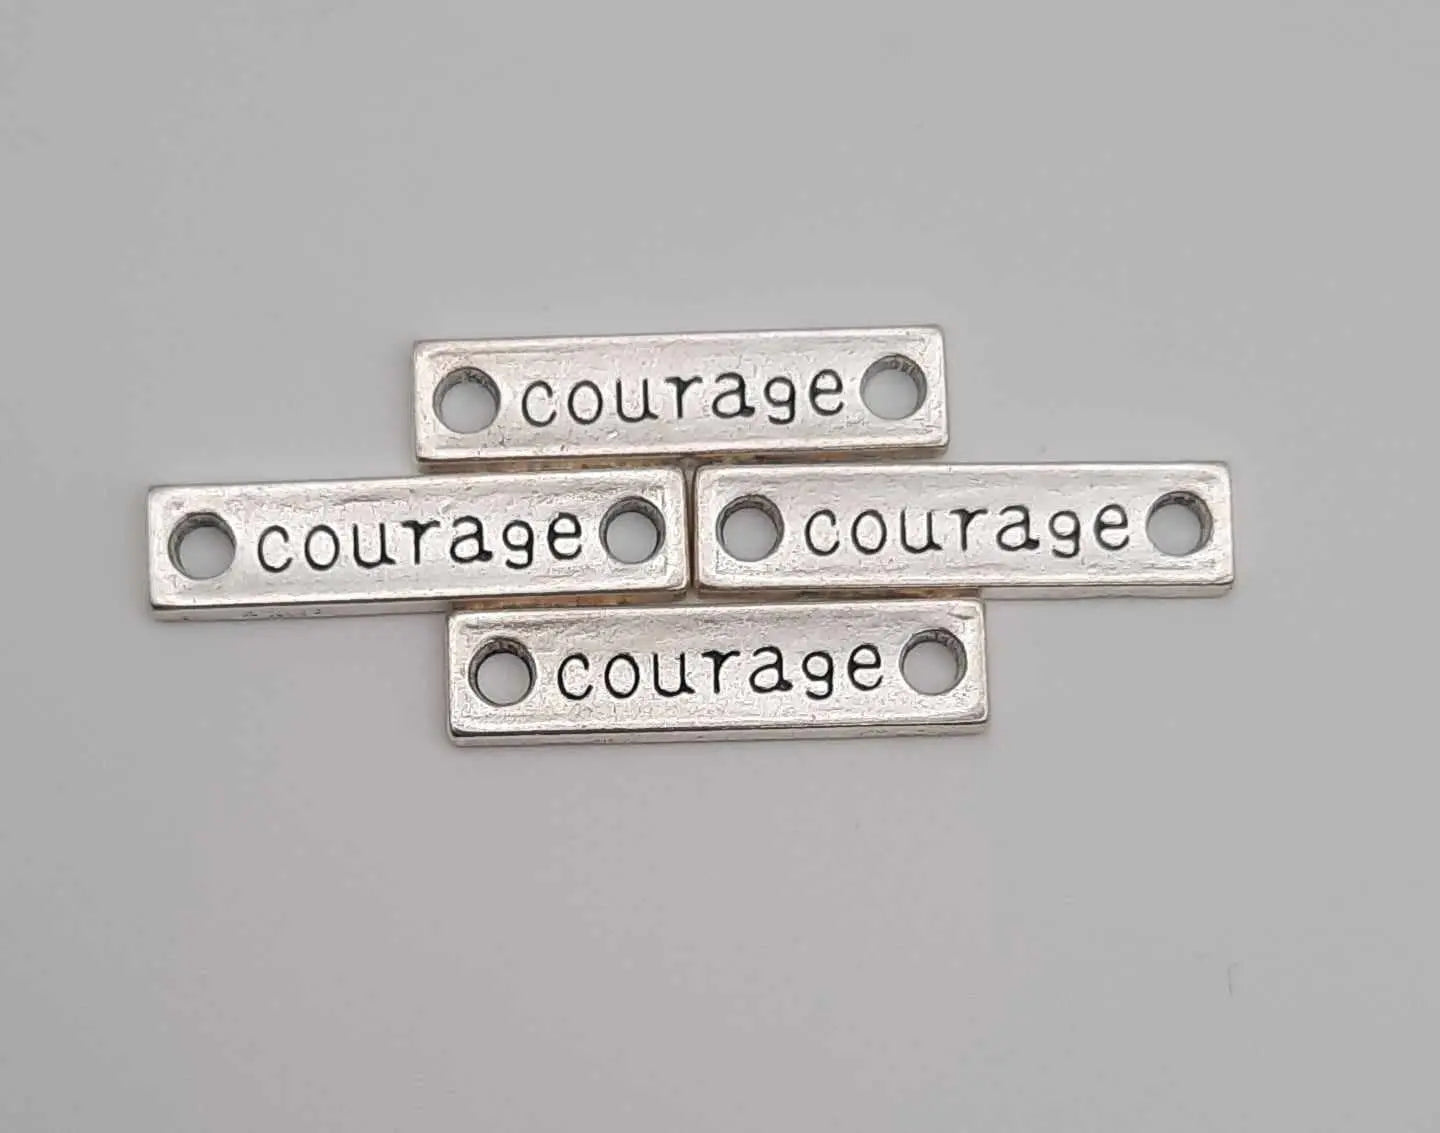 Custom made faux suede with inspirational words bracelets - Image #21